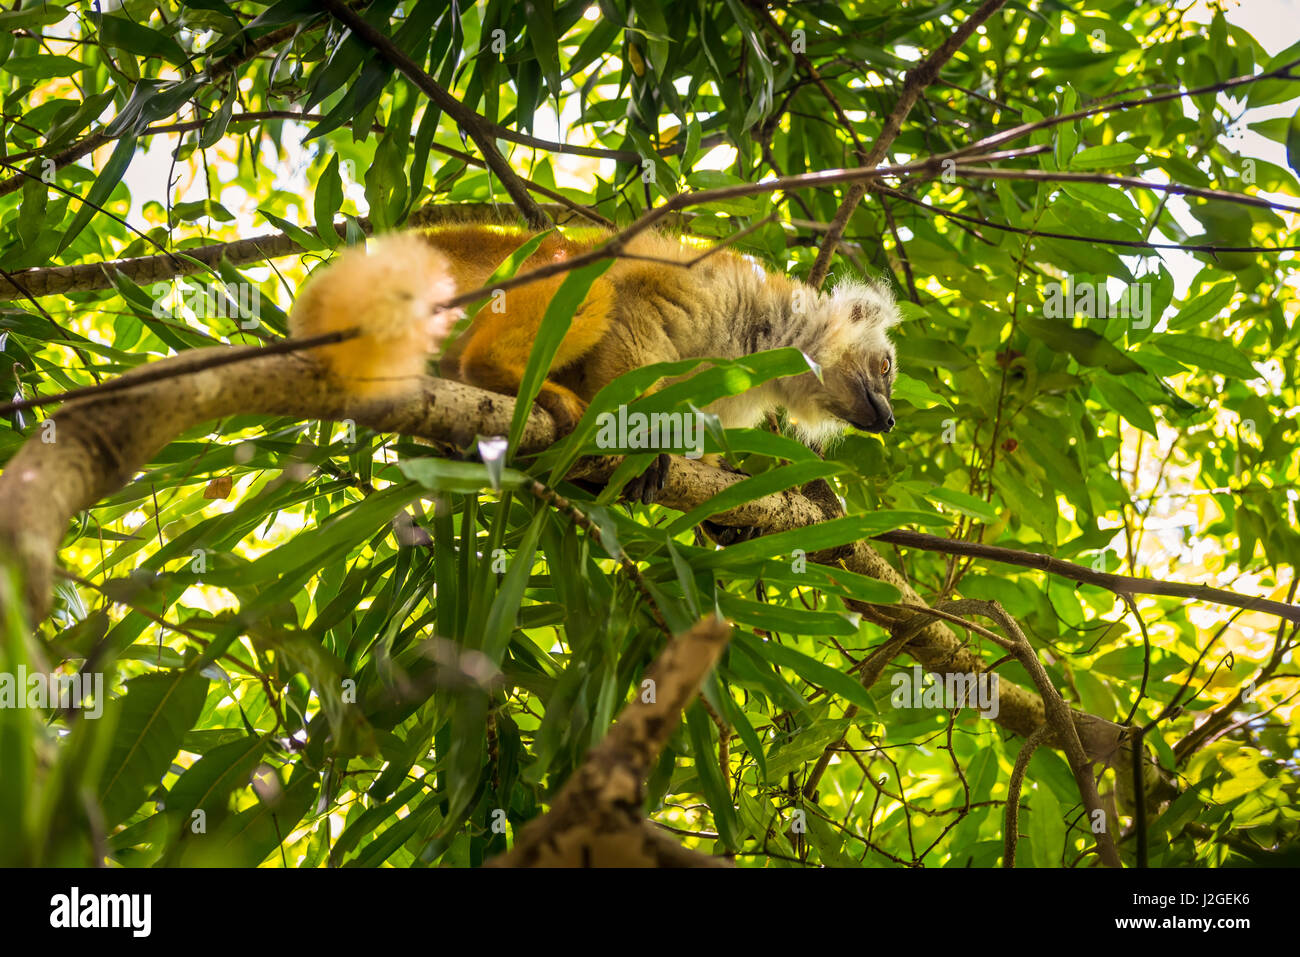 Lemur in their natural habitat, Lokobe Strict Nature Reserve in Nosy Be, Madagascar, Africa Stock Photo